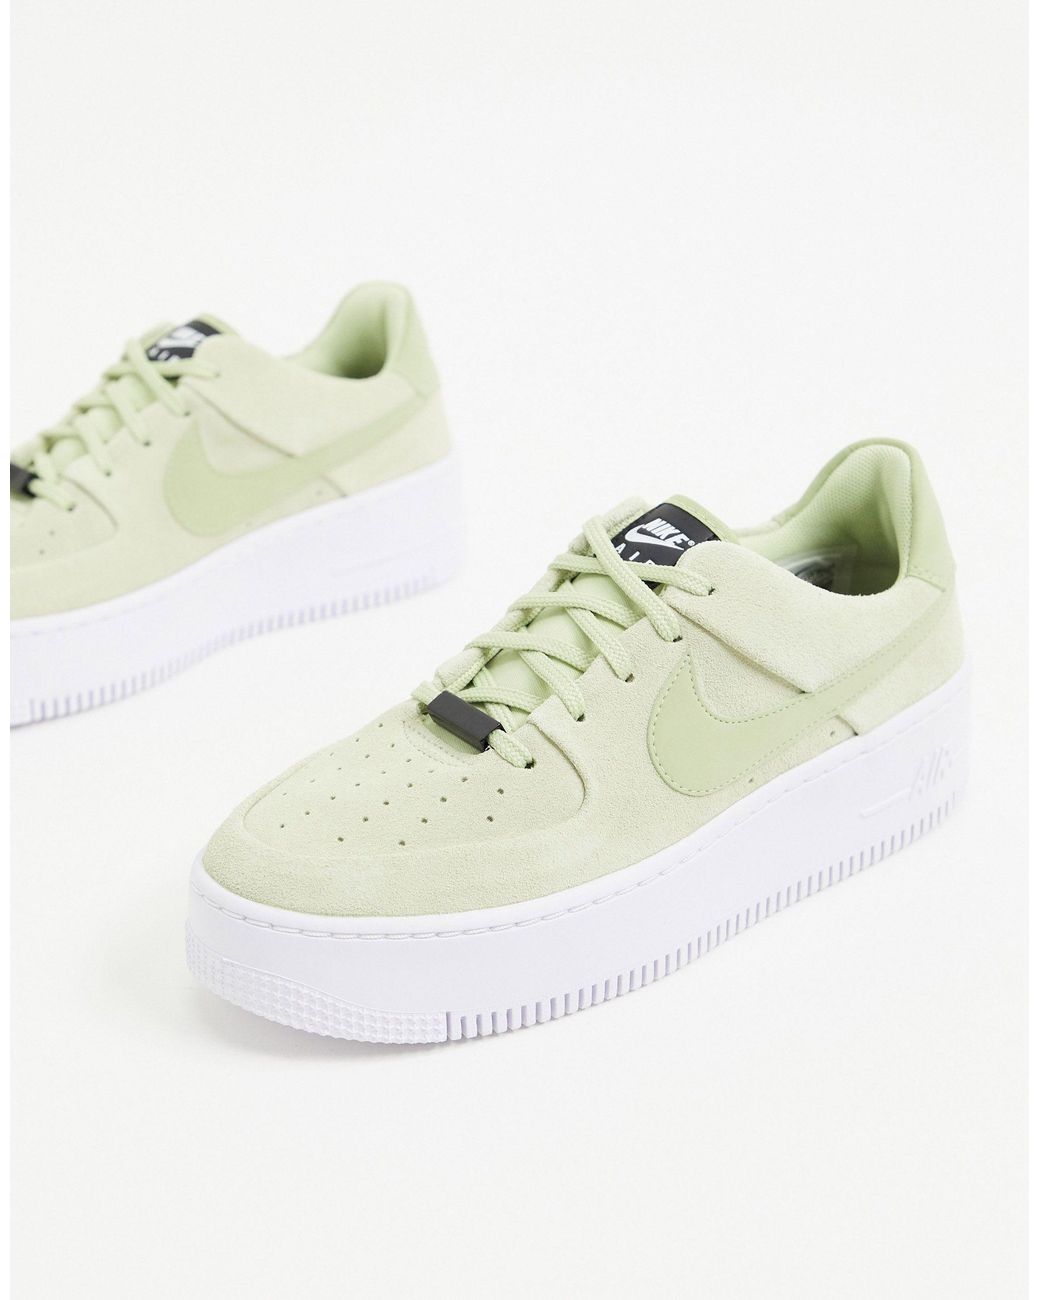 Nike Air Force 1 Sage Suede Trainers in Green | Lyst Australia